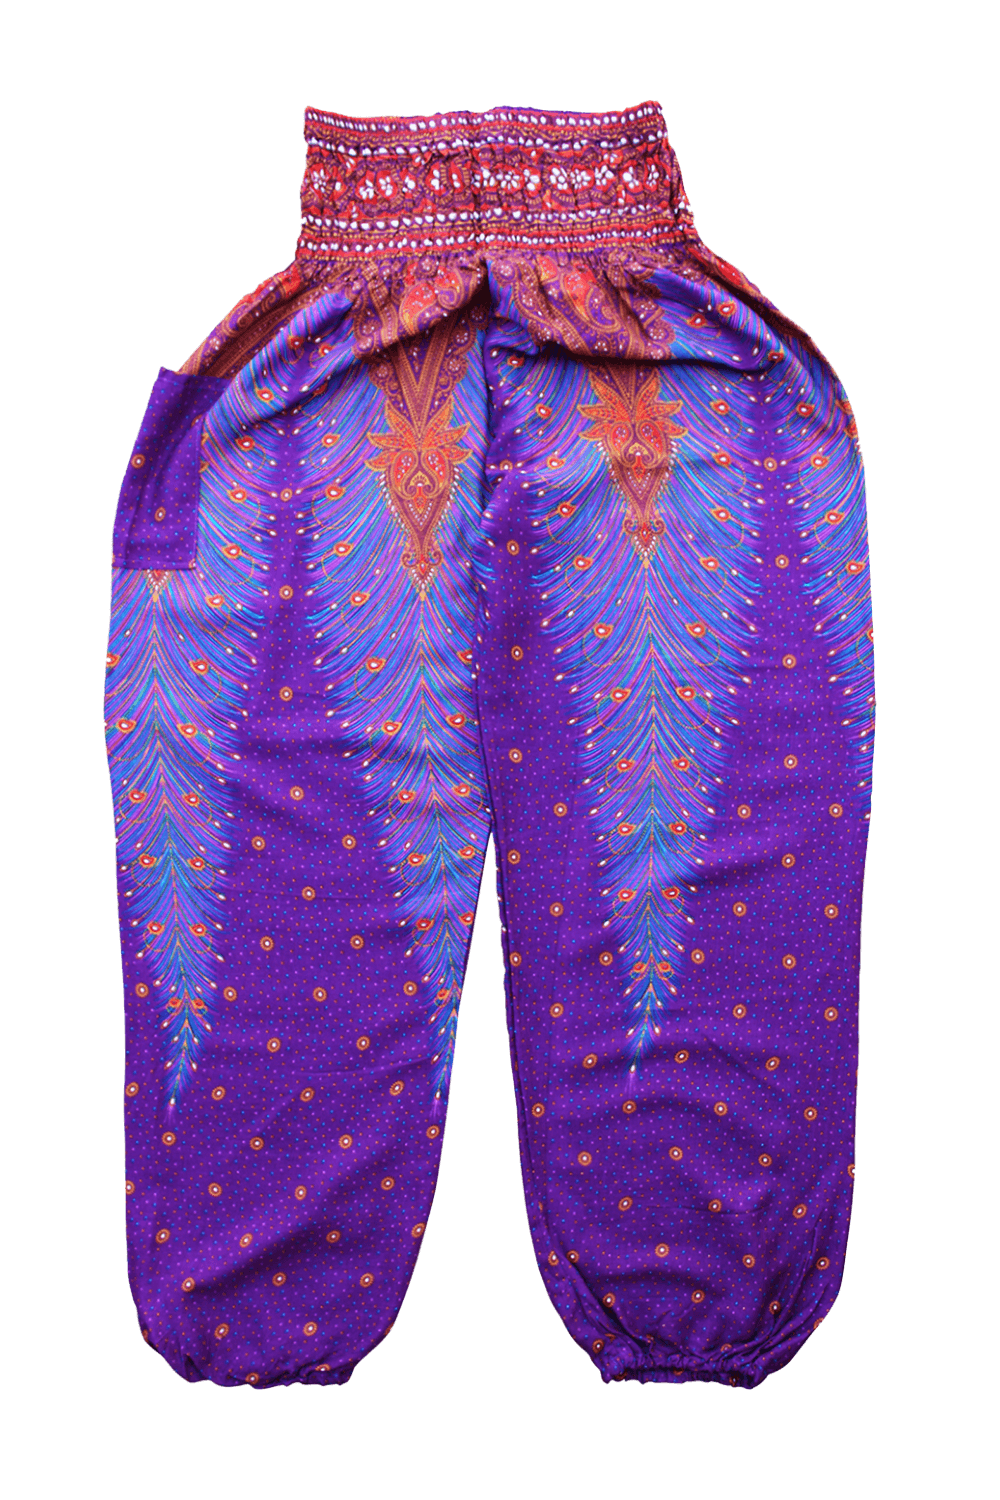 Purple Peacock Harem Pants from Bohemian Island. Unisex and made from cotton